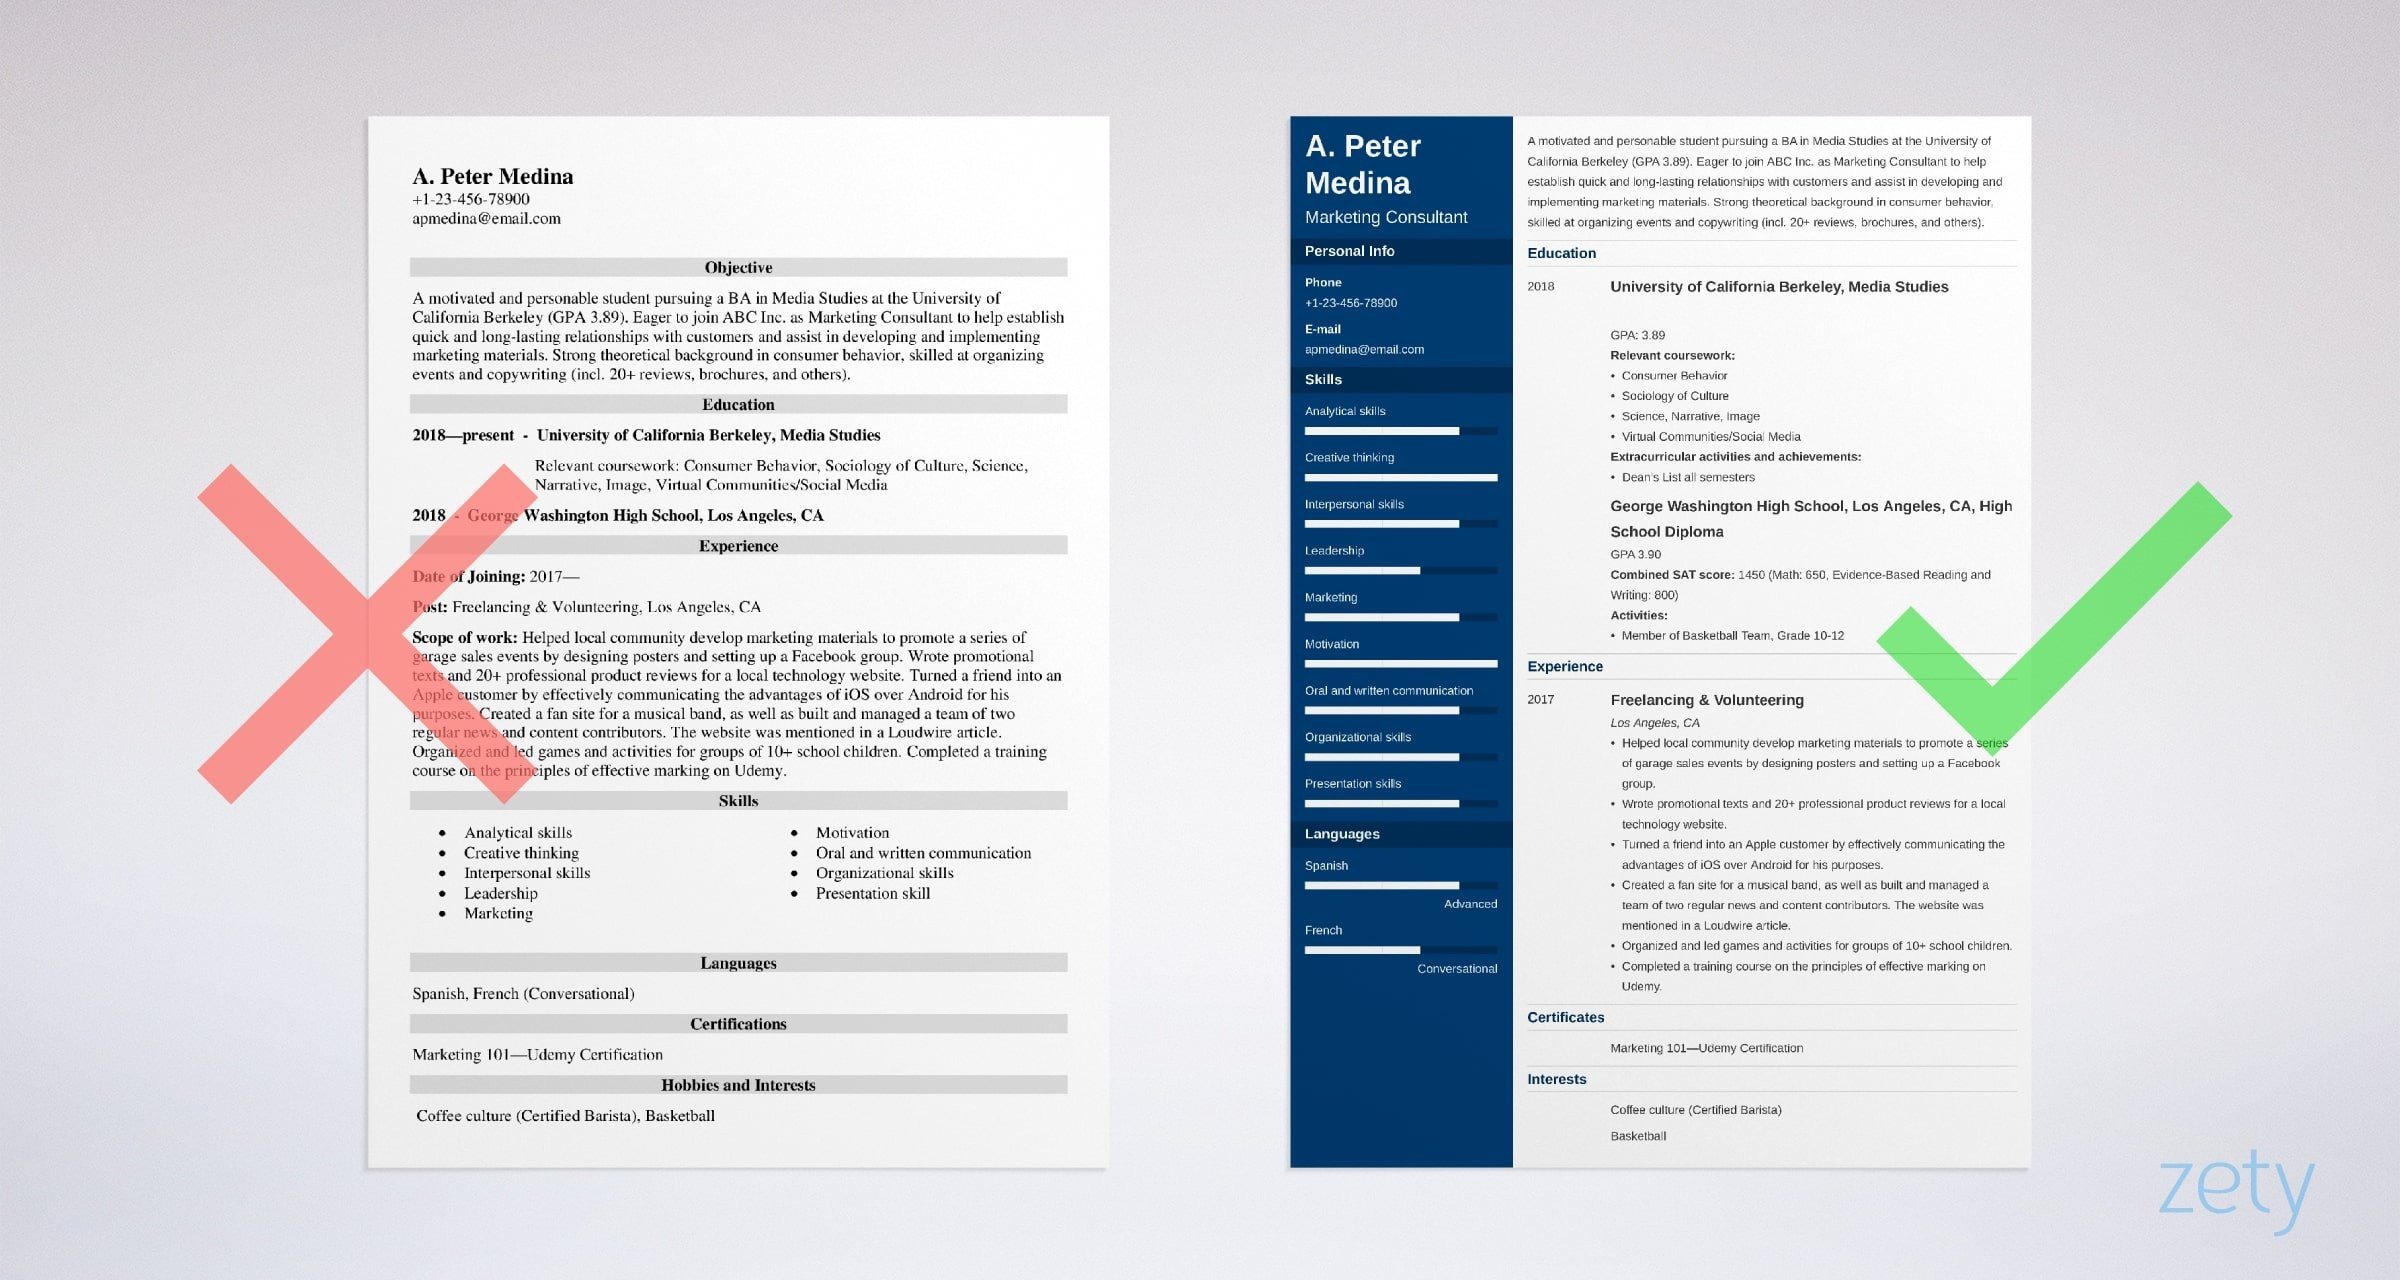 First Time Job Seeker Resume Samples How to Make A Resume with No Experience: First Job Examples